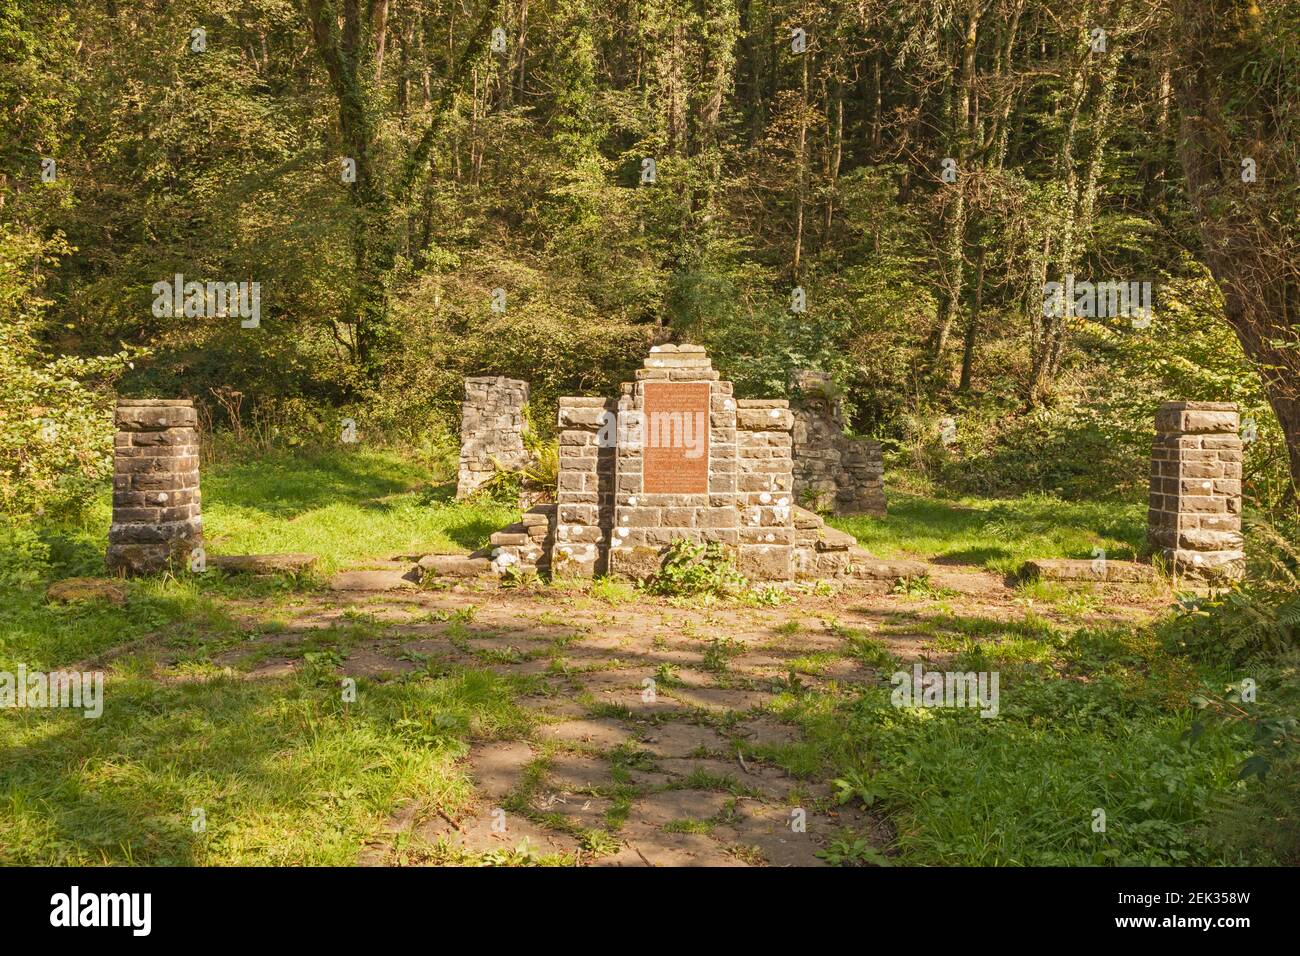 Site of Pre-reformation Chapel of Trinity Well. Marked as first Baptist Church in Wales (1649-60).  Ilston Cwm, Gower Peninsula, Swansea, S Wales, UK Stock Photo